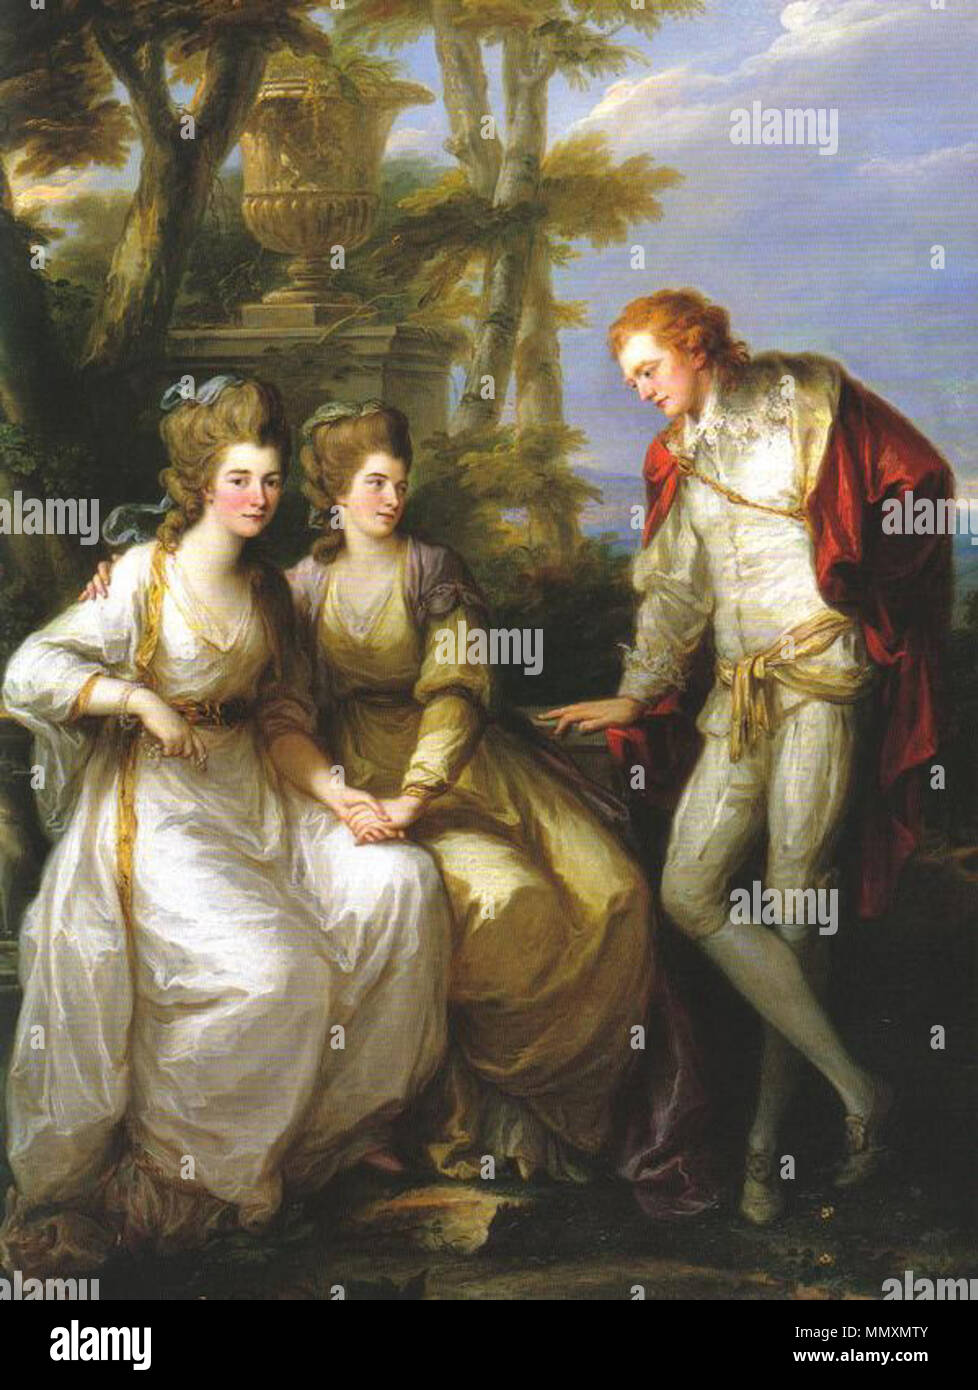 .  English: A portrait of the three children of the first Earl Spencer: Lady Georgiana Spencer (later Duchess of Devonshire) (7 June 1757 – 30 March 1806); Lady Henrietta Spencer (later Countess of Bessborough) (16 June 1761 – 11 November 1821); and Viscount Althorp (later 2nd Earl Spencer) (1 September 1758 – 10 November 1834).   Portrait of Lady Georgiana, Lady Henrietta Frances and George John Spencer, Viscount Althorp.. 1774. Angelica Kauffmann, Portrait of Lady Georgiana, Lady Henrietta Frances and George John Spencer, Viscount Althorp (1774) Stock Photo